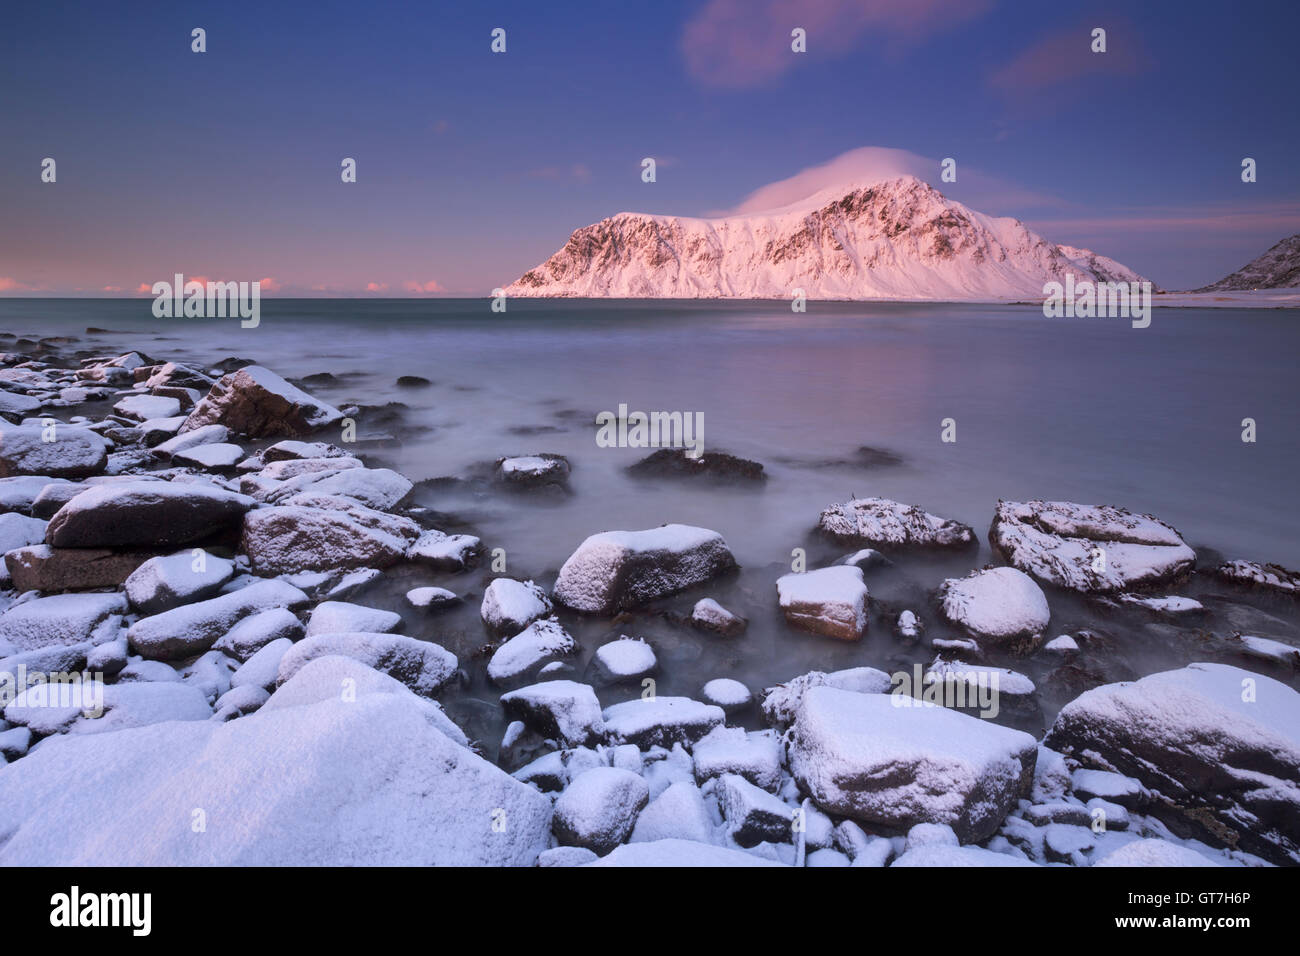 Alpenglow at the rocky beach of Skagsanden on the Lofoten in northern Norway, photographed at dusk in winter. Stock Photo